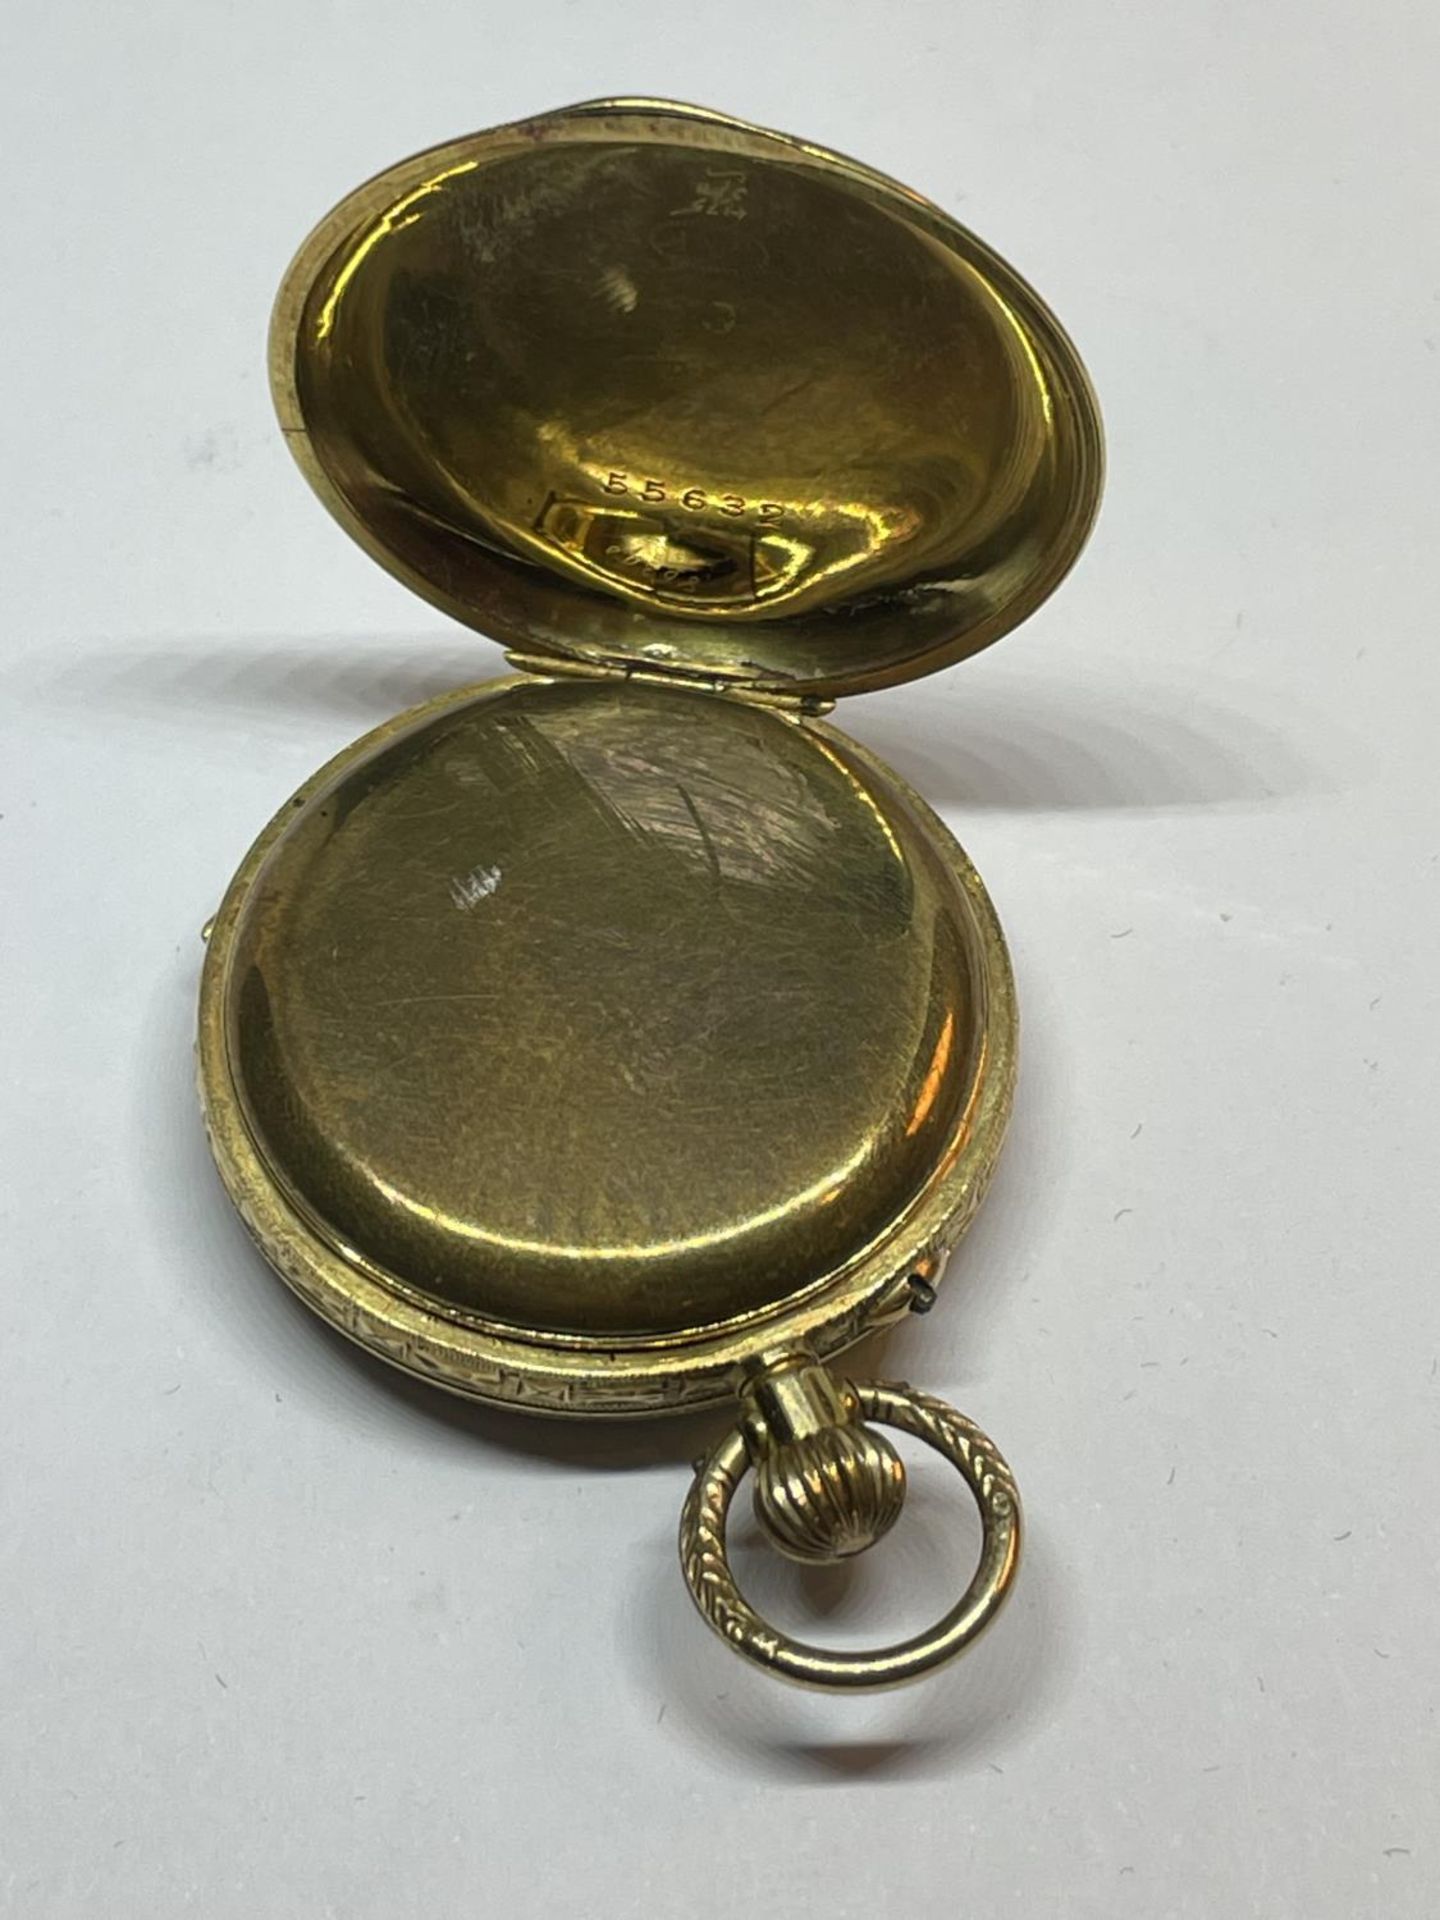 AN 18CT GOLD TOP WIND POCKET WATCH WITH WHITE ENAMELLED DIAL AND GOLD HANDS, WITH ORIGINAL BOX - Image 5 of 7